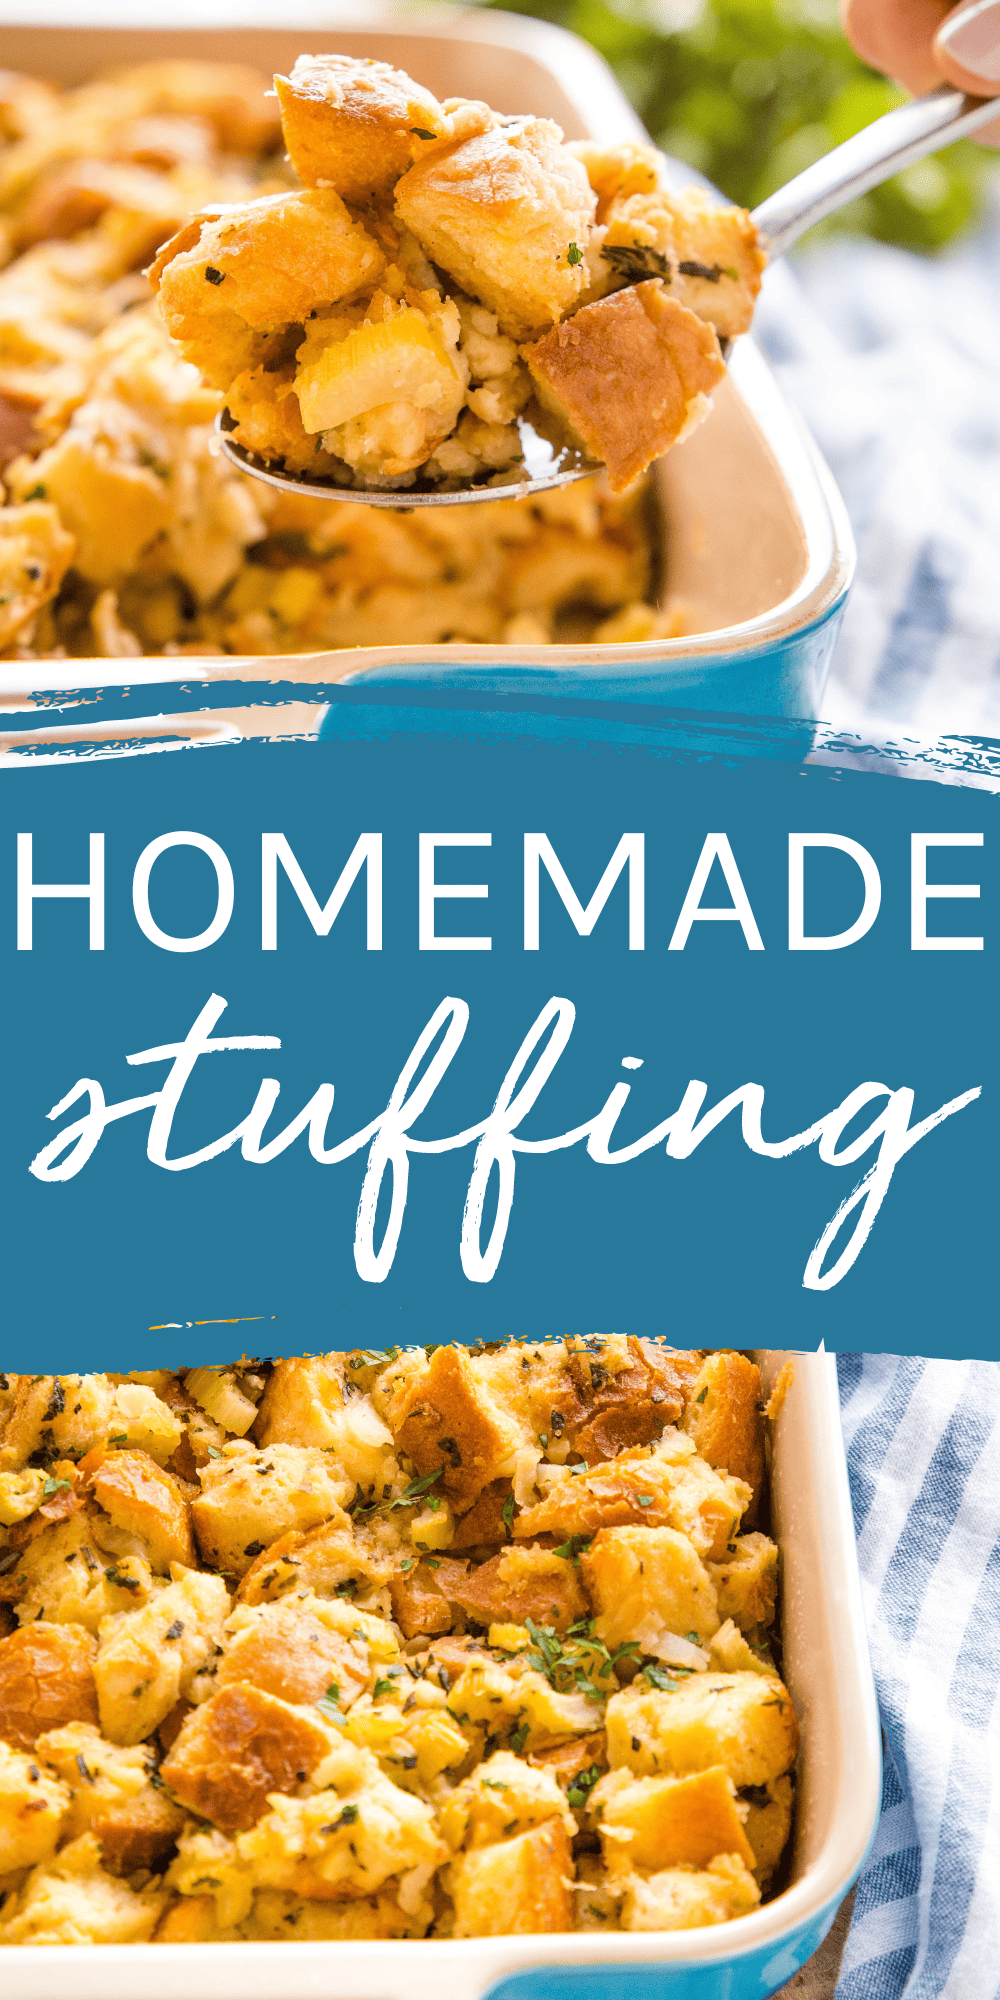 This Homemade Stuffing recipe is the BEST holiday side dish. Easy to make with basic ingredients & perfect for Christmas and Thanksgiving! Recipe from thebusybaker.ca! #homemadestuffing #stuffingrecipe #stuffing #howtomakestuffing #holidaystuffing #christmassidedish #thanksgivingsidedish #holidayrecipe #holidaysidedish #sidedish #thanksgivingrecipe via @busybakerblog